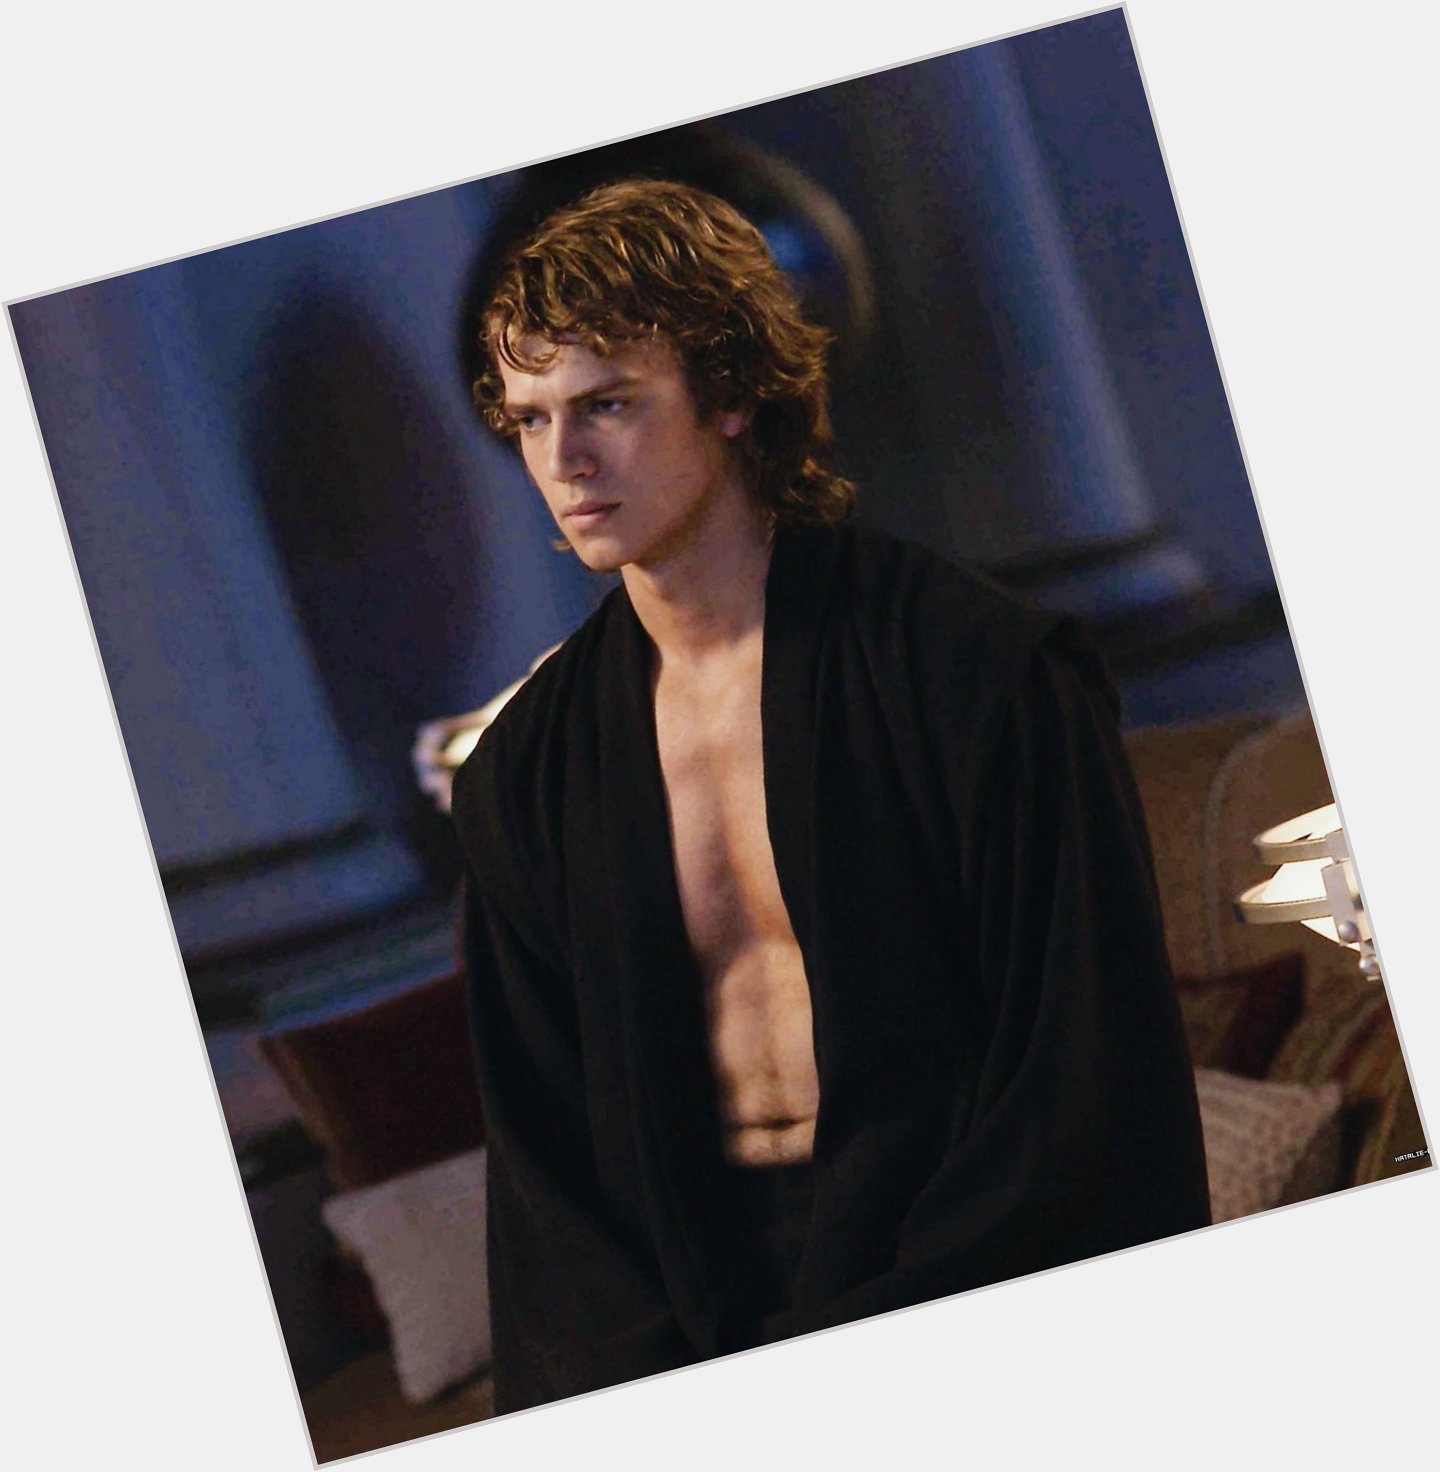 HAPPY BIRTHDAY TO THE ONE AND ONLY FOREVER SEXY HAYDEN CHRISTENSEN               